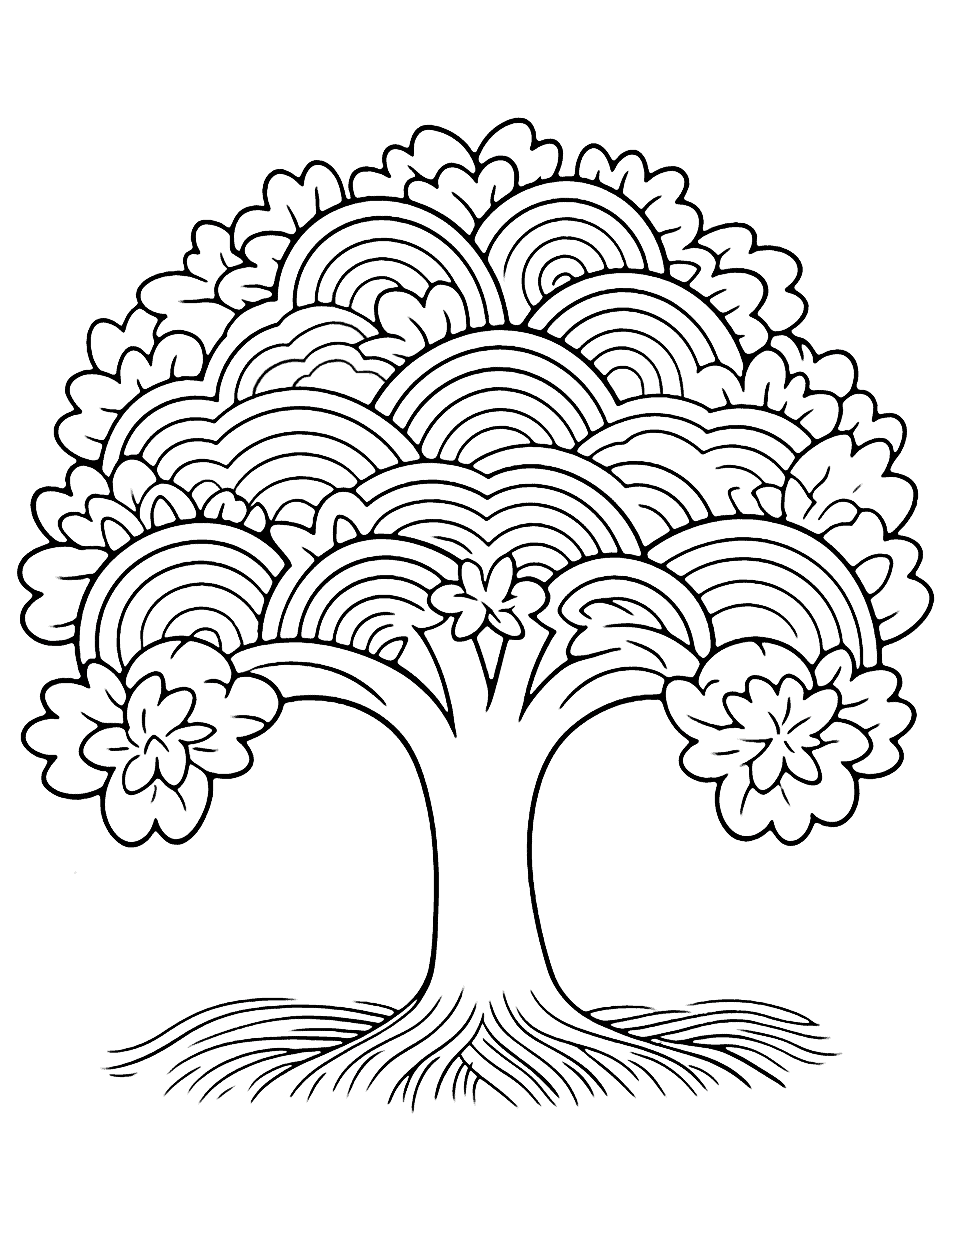 Rainbow Tree Coloring Page - A detailed coloring page featuring a tree with rainbow-colored leaves.